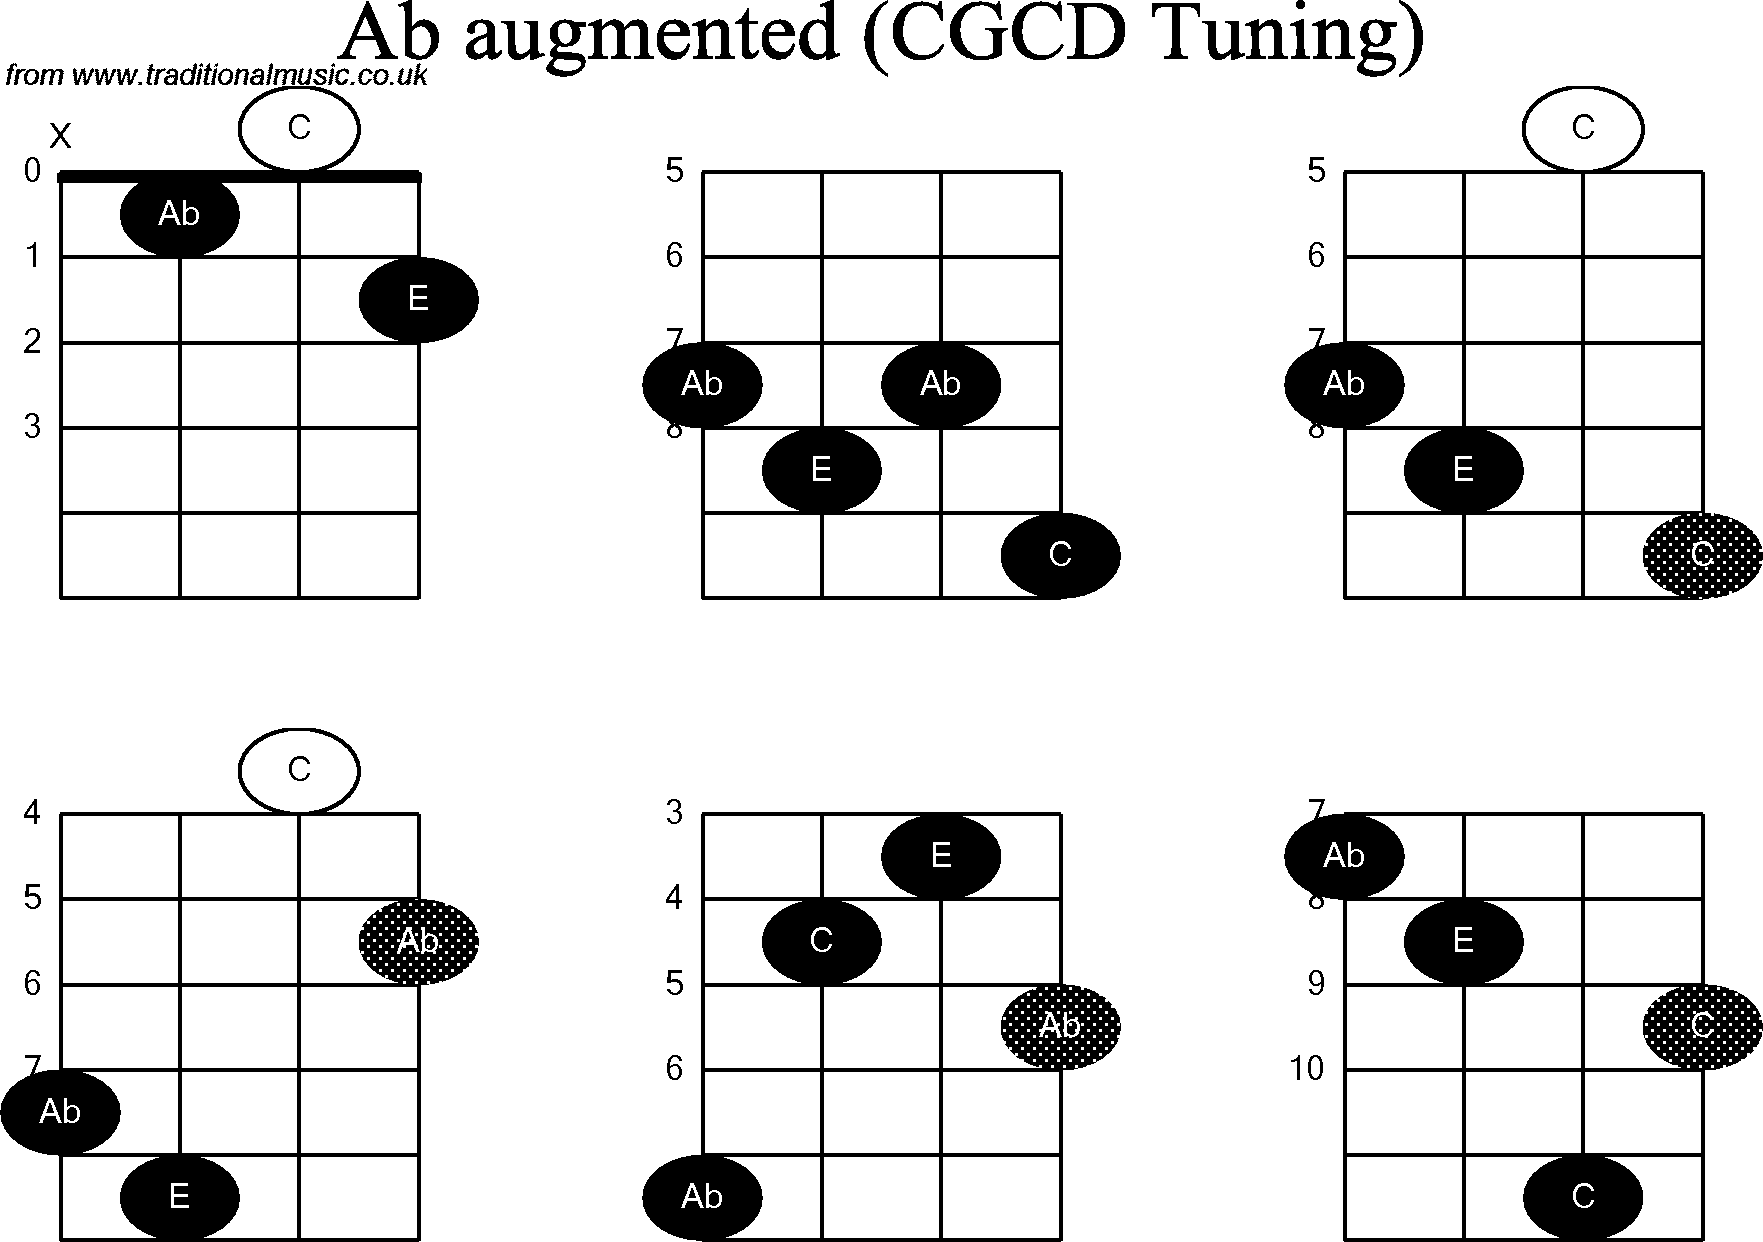 Chord diagrams for Banjo(Double C) Ab Augmented.